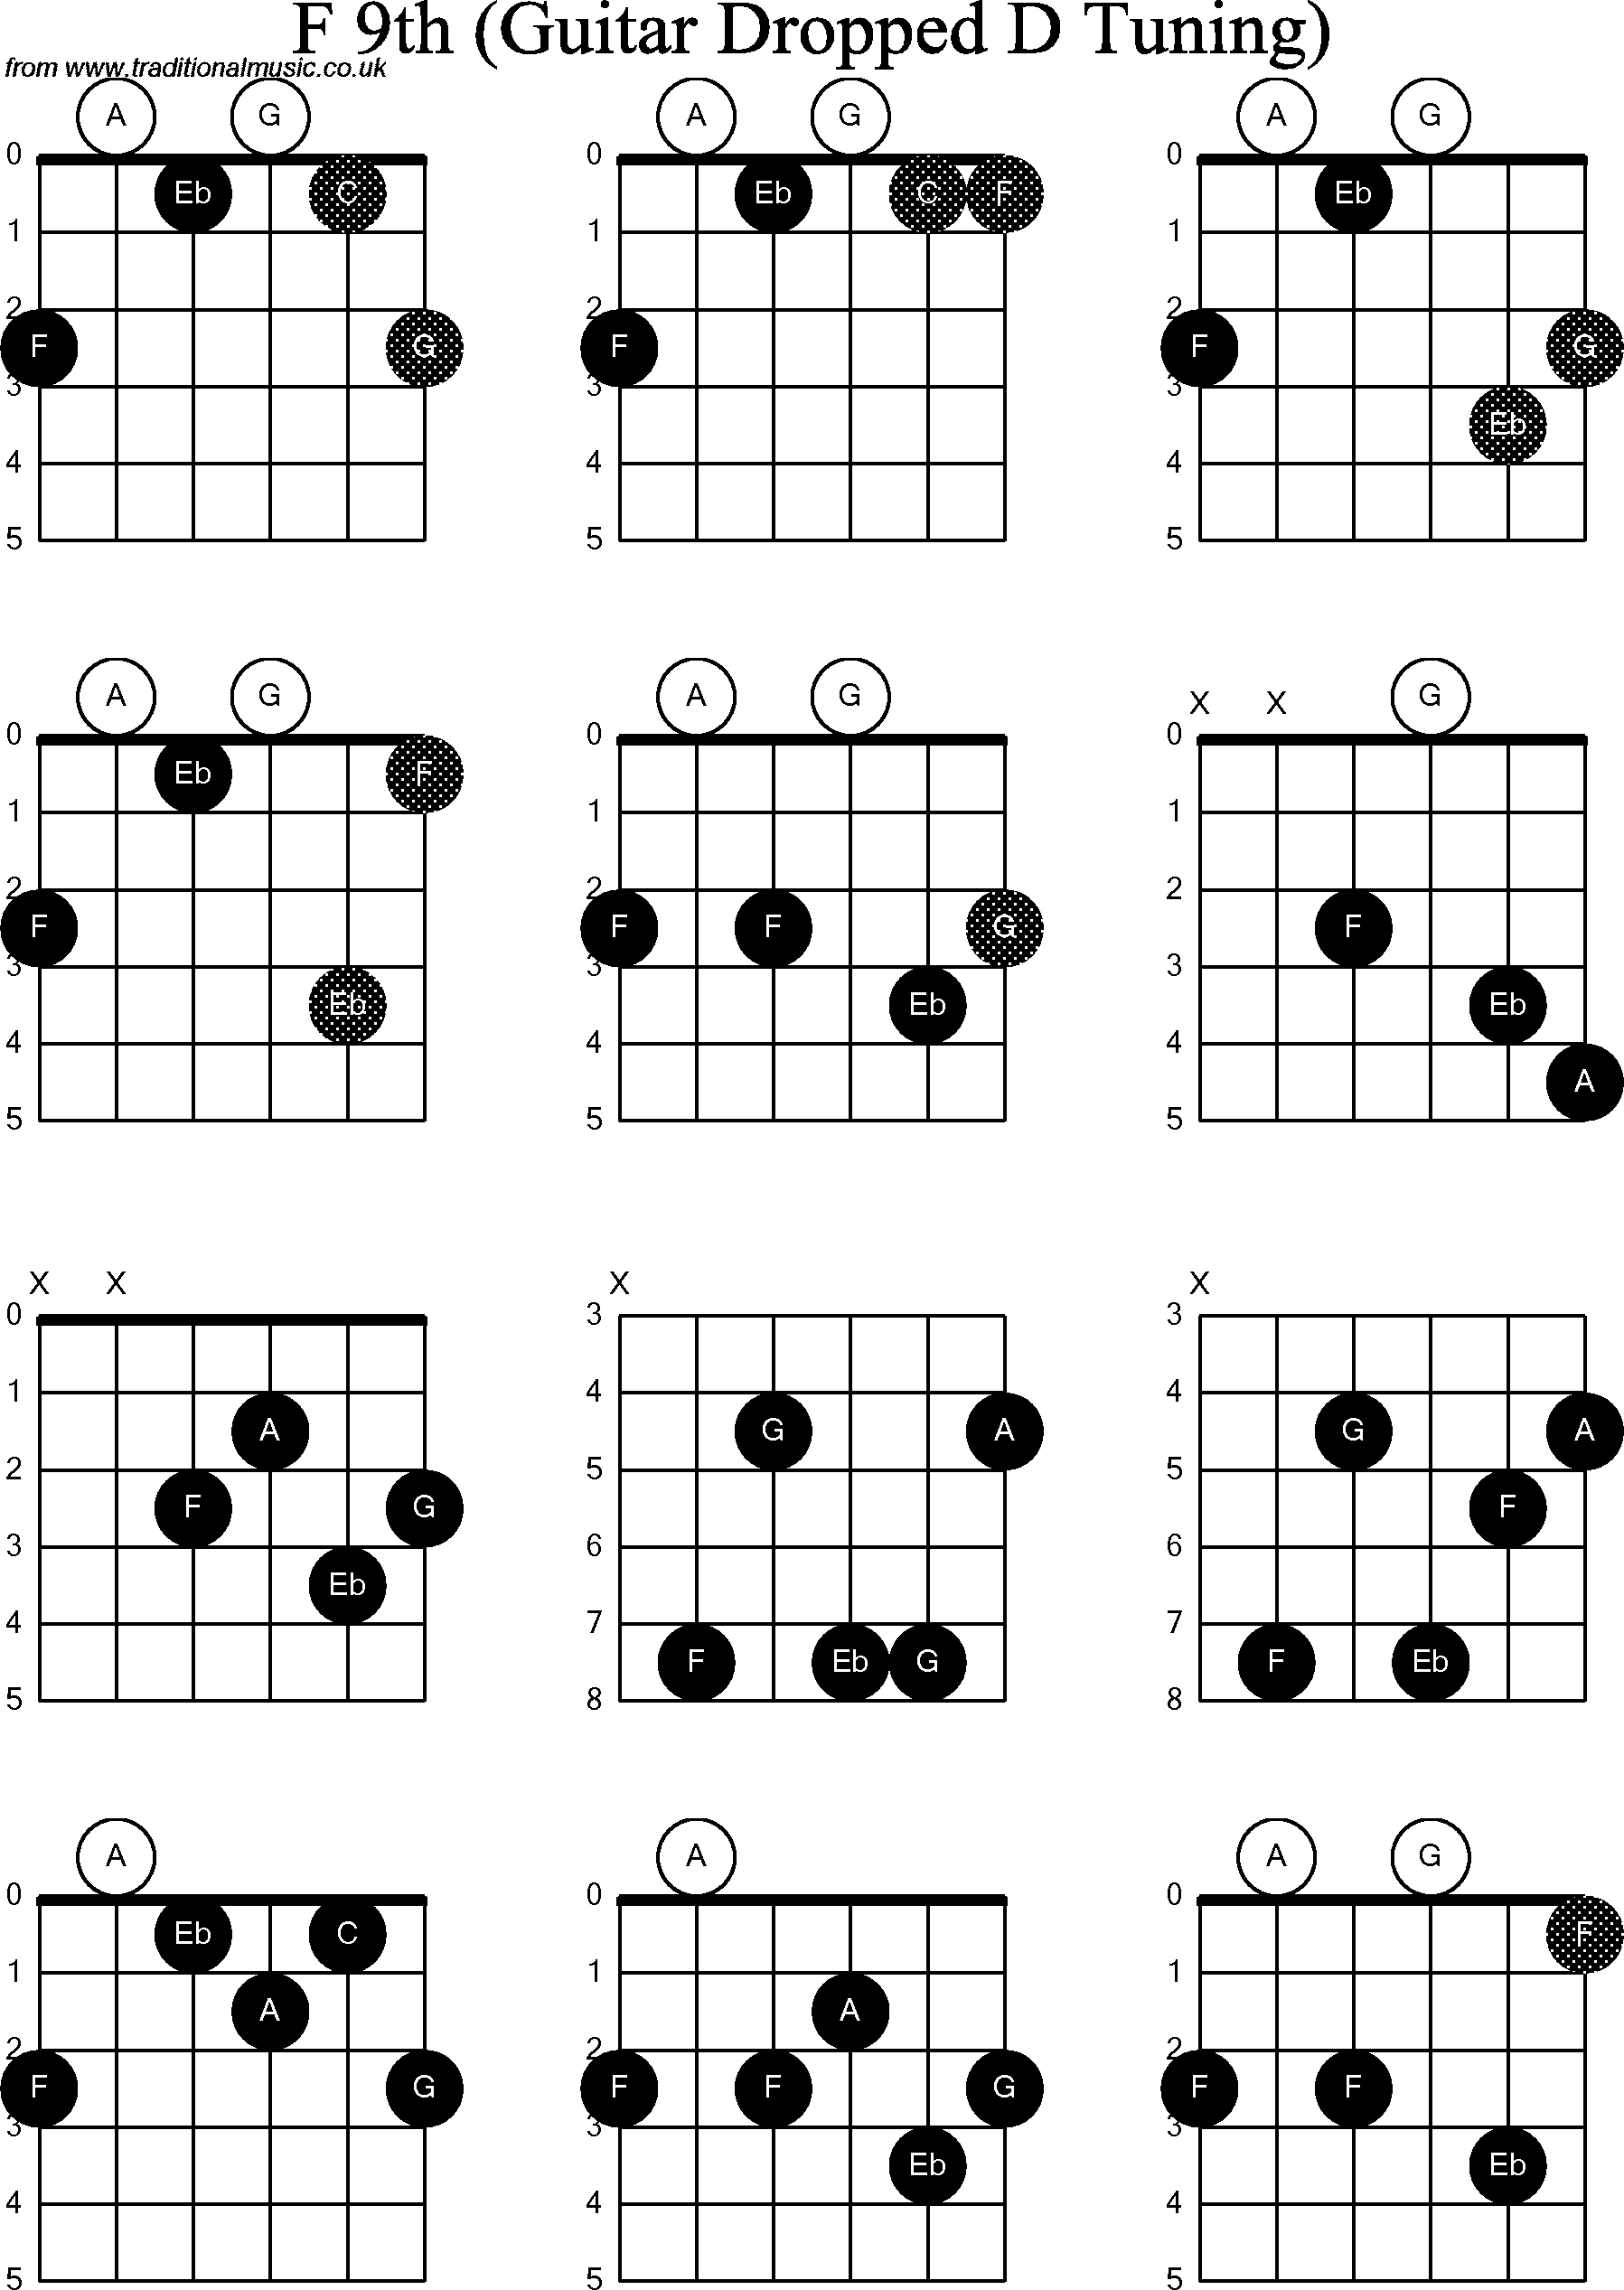 Chord diagrams for dropped D Guitar(DADGBE), F9th